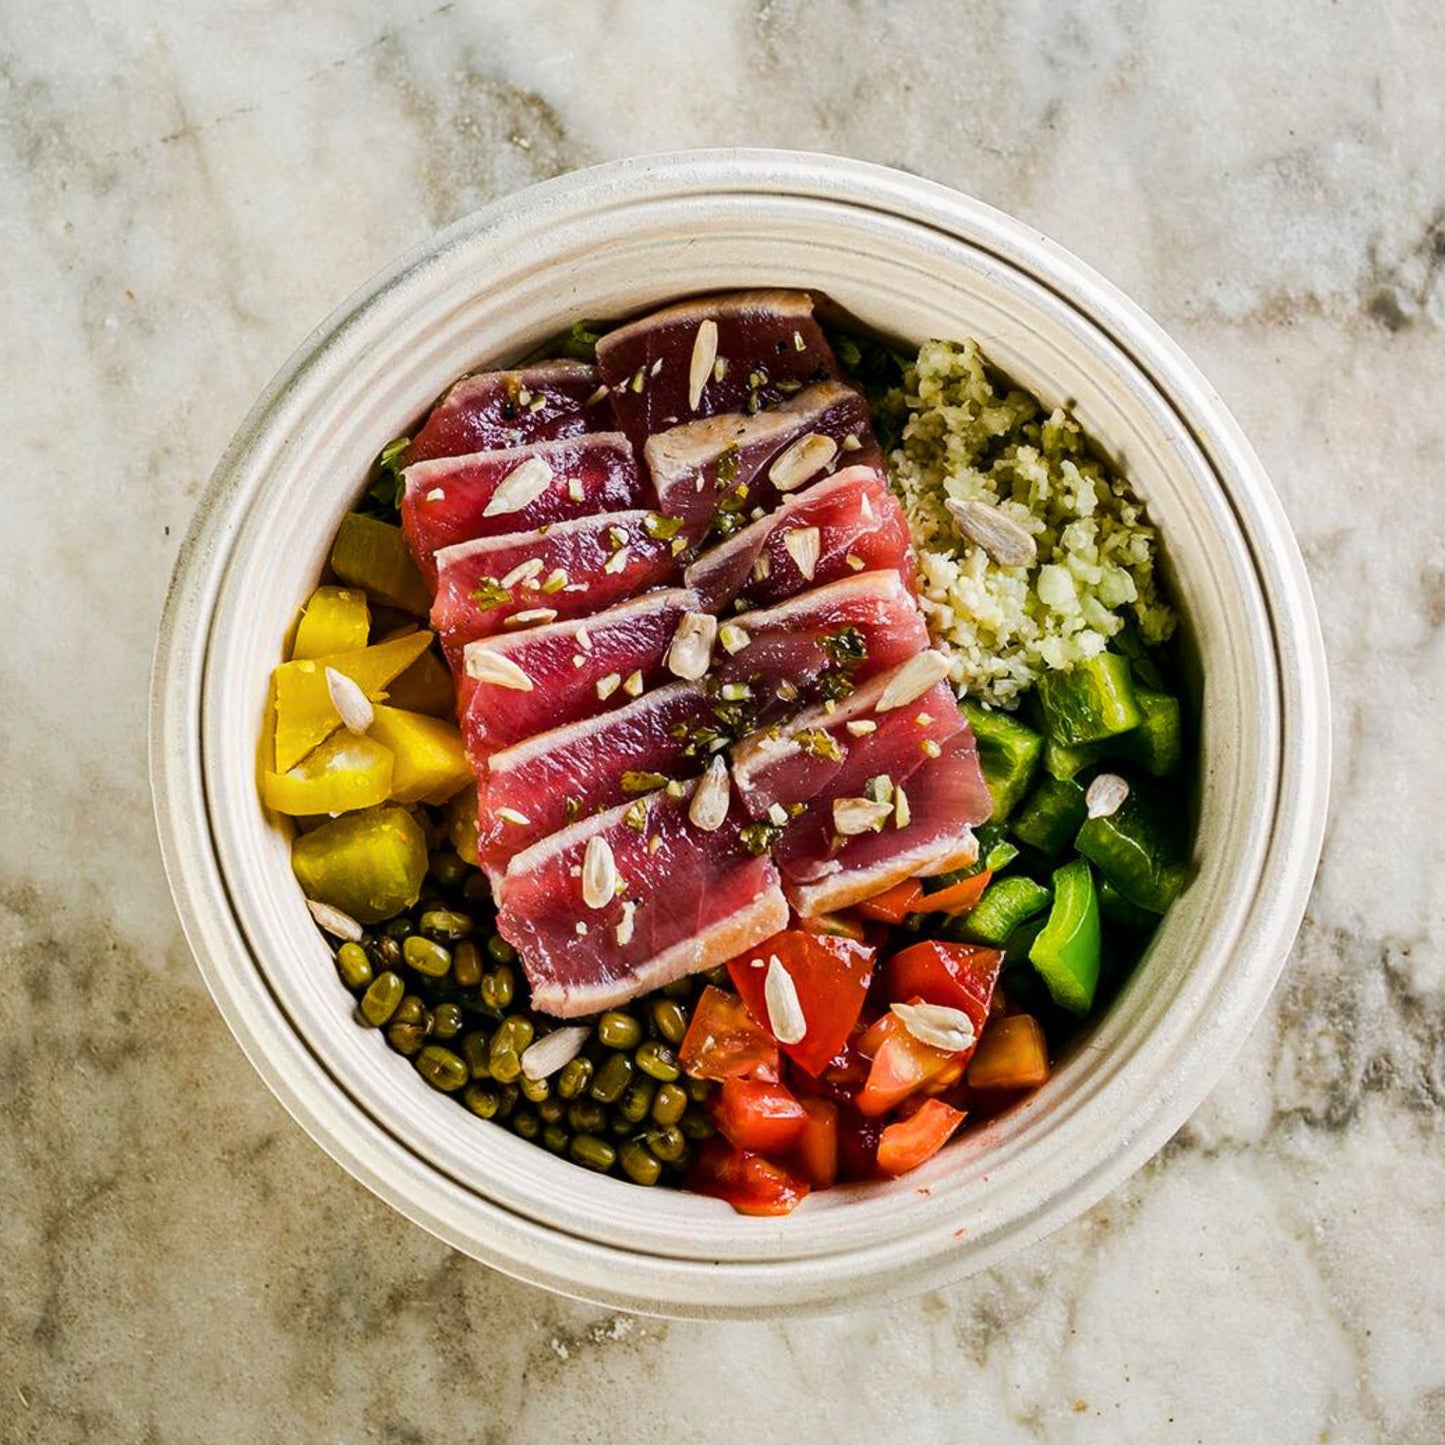 -50% for Superfood Harvest Bowl to choose from meat, vegan and vegetarian options: nutritious, filling and delicious meal in a botanical setting